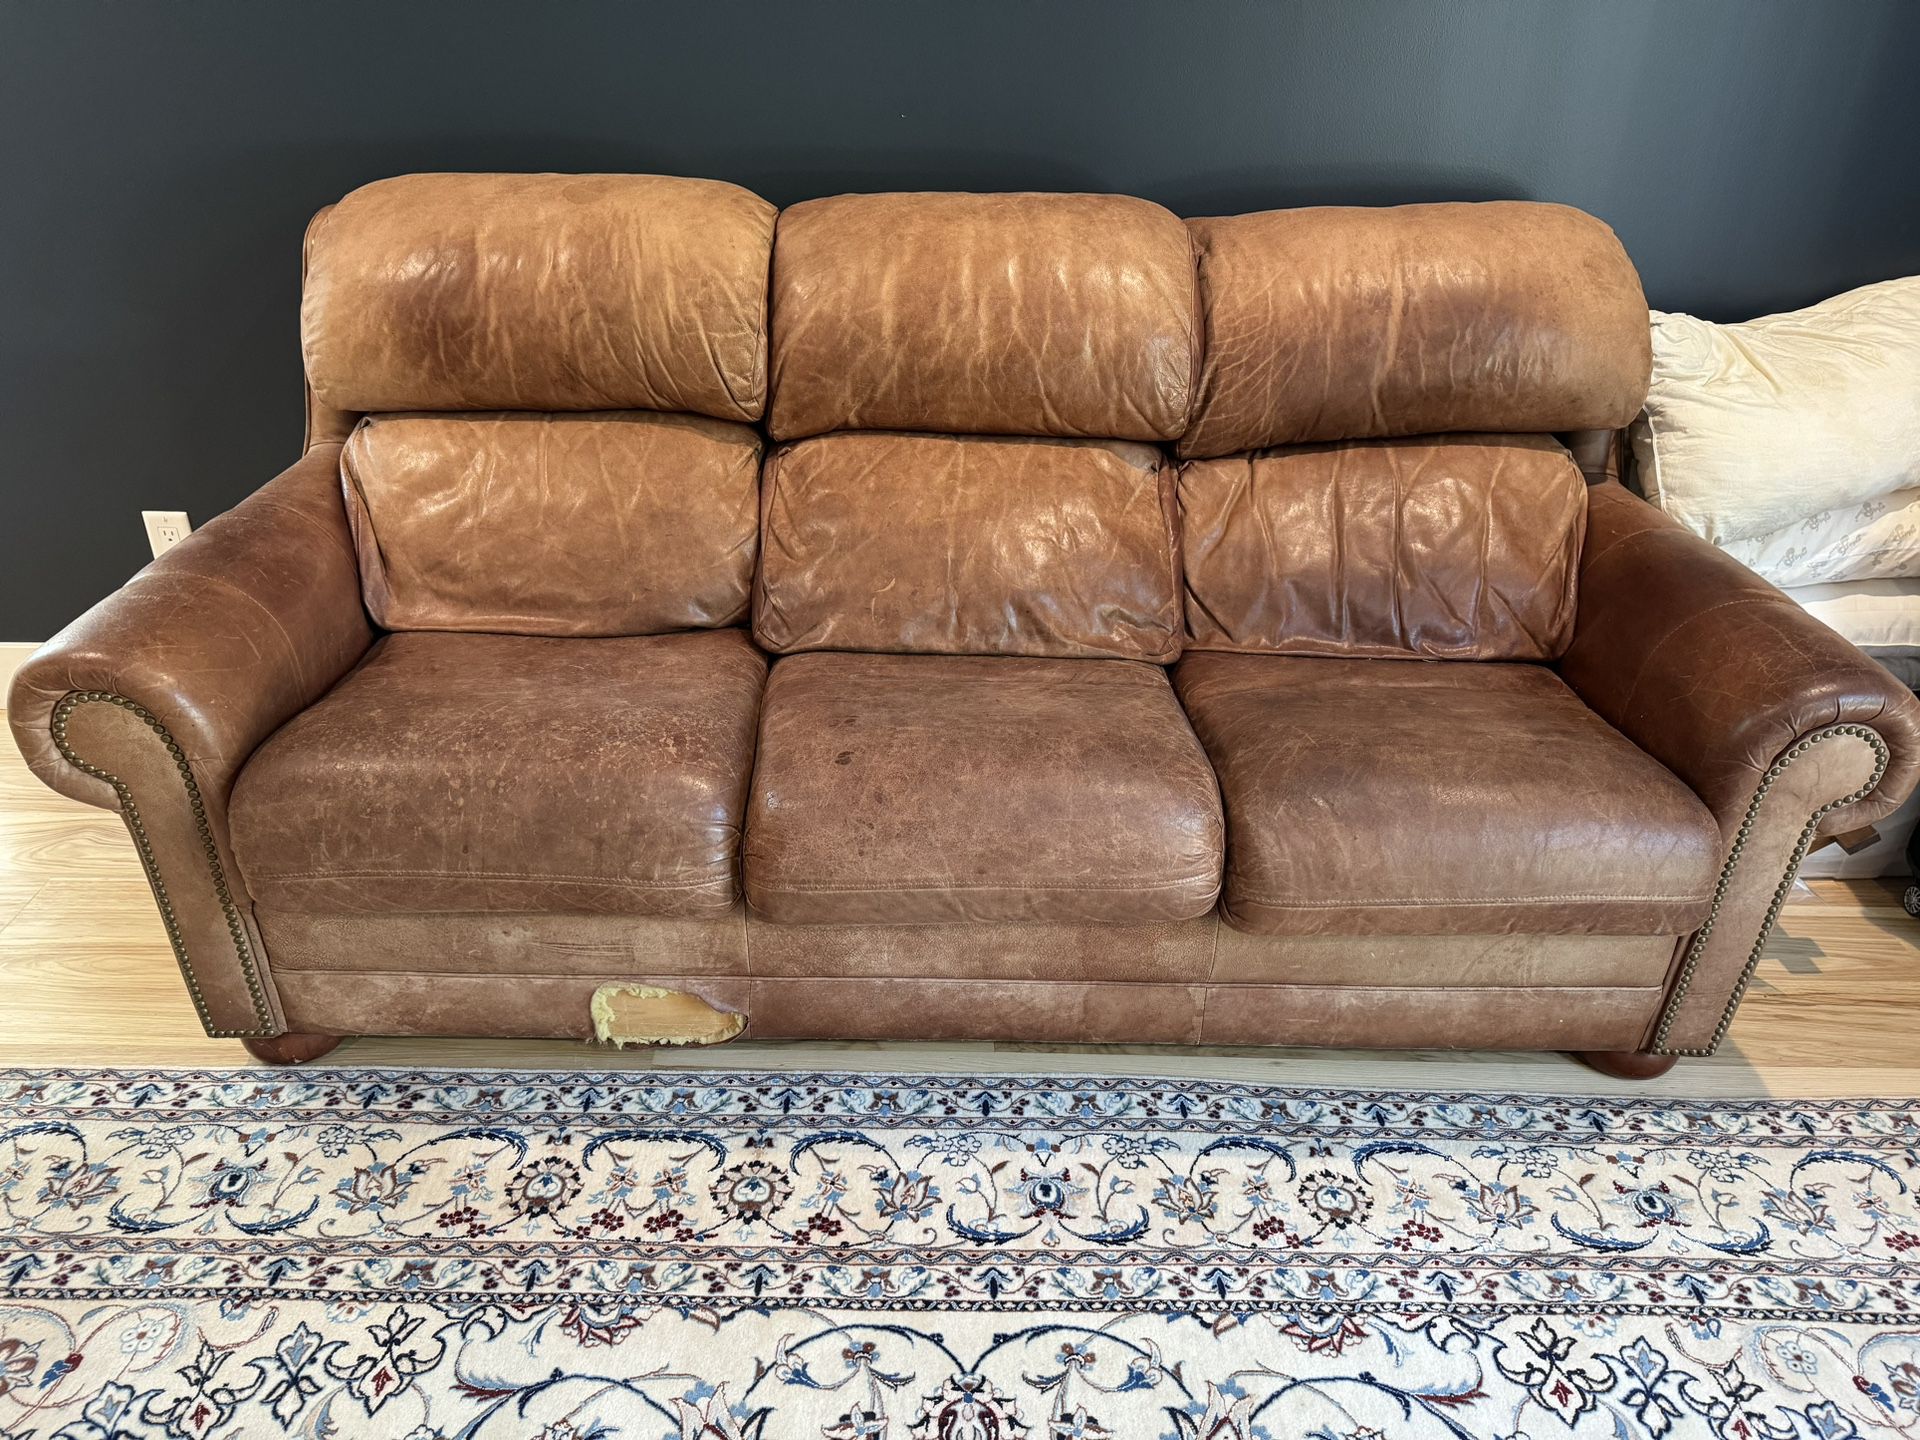 FREE! Leather Couch